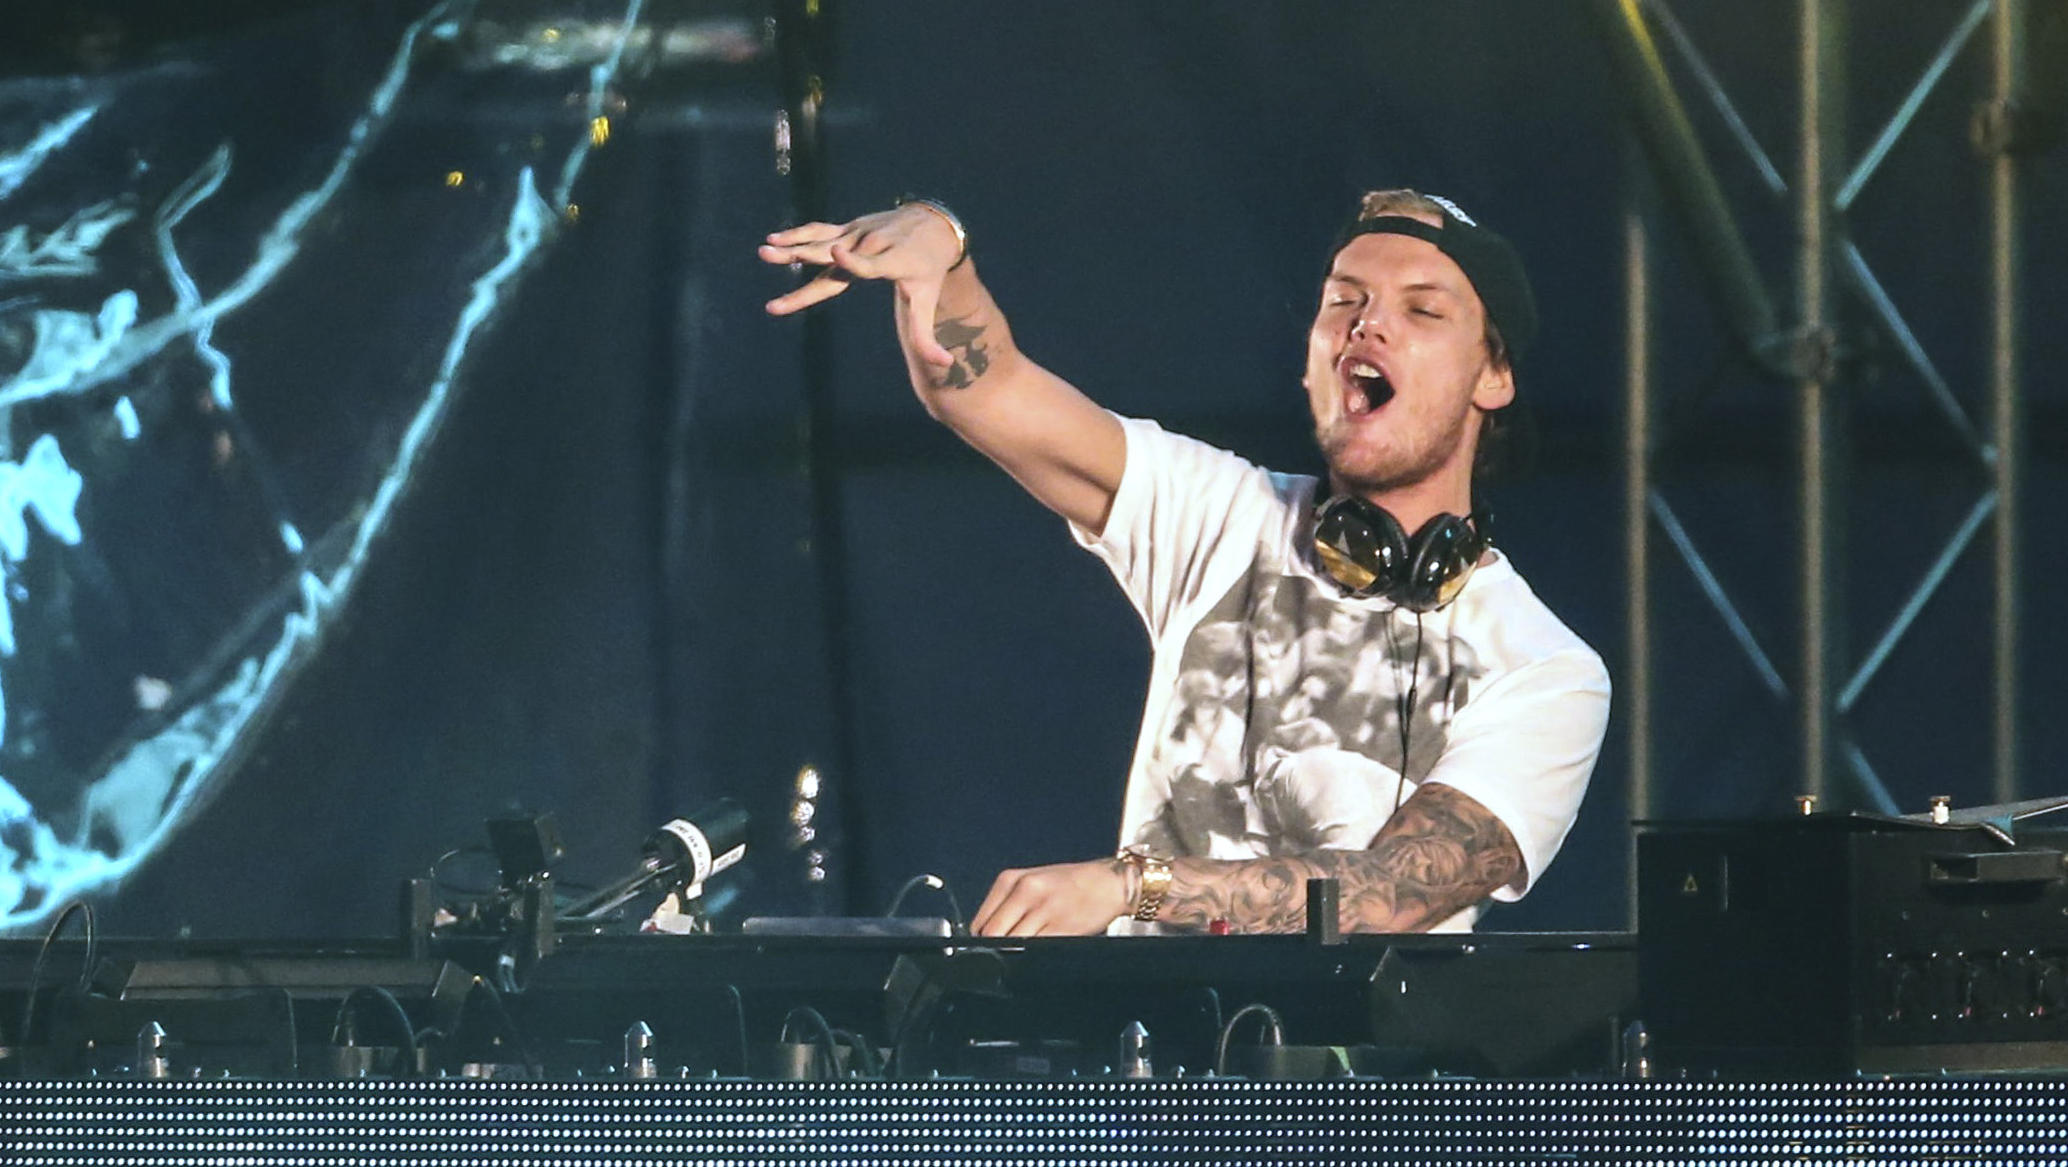 What Is Pancreatitis The Condition Avicii Suffered From Years Before Death Cbs News